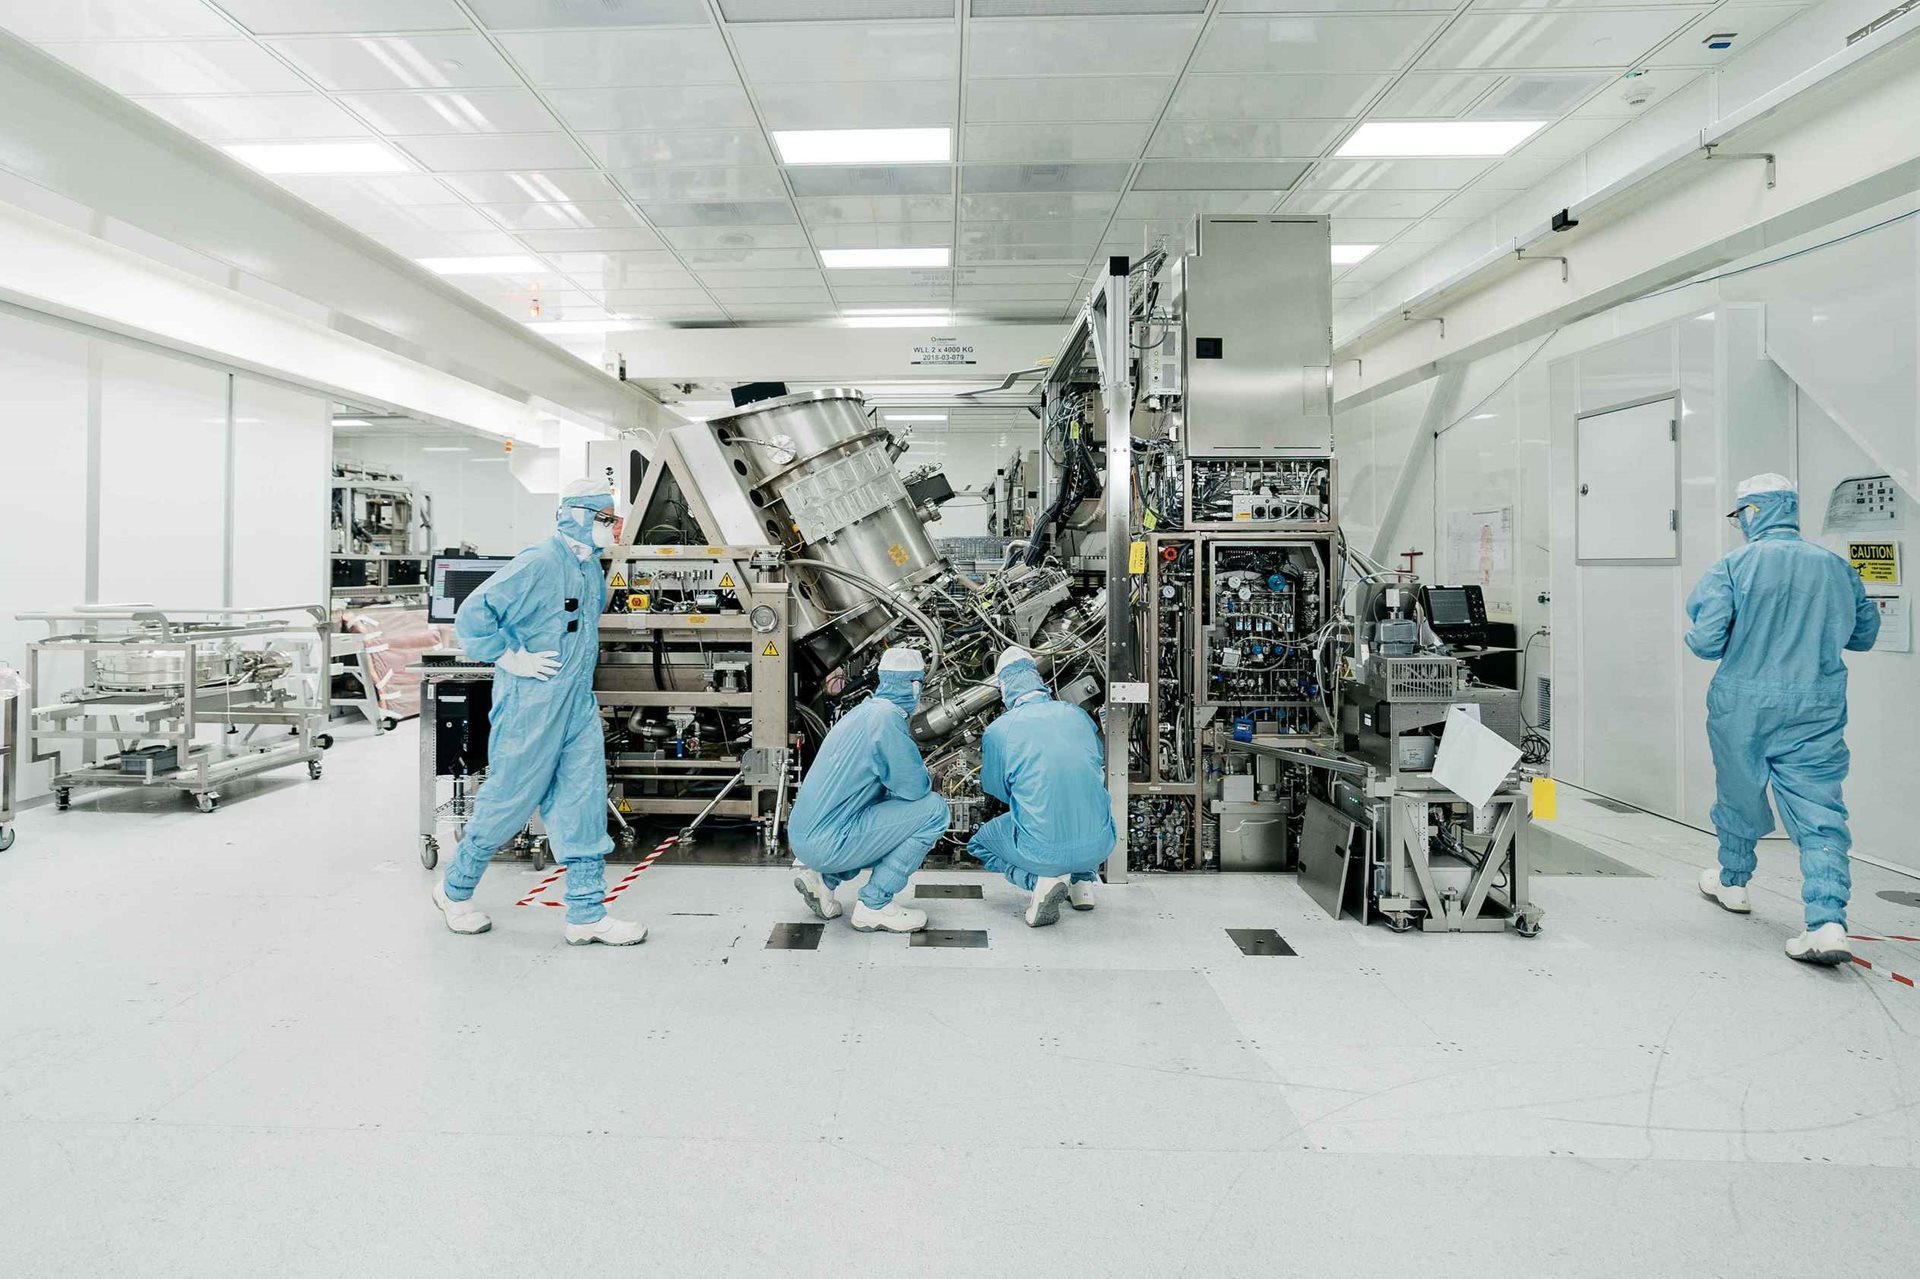 People in cleanroom suits work on an exposed ASML lithography system